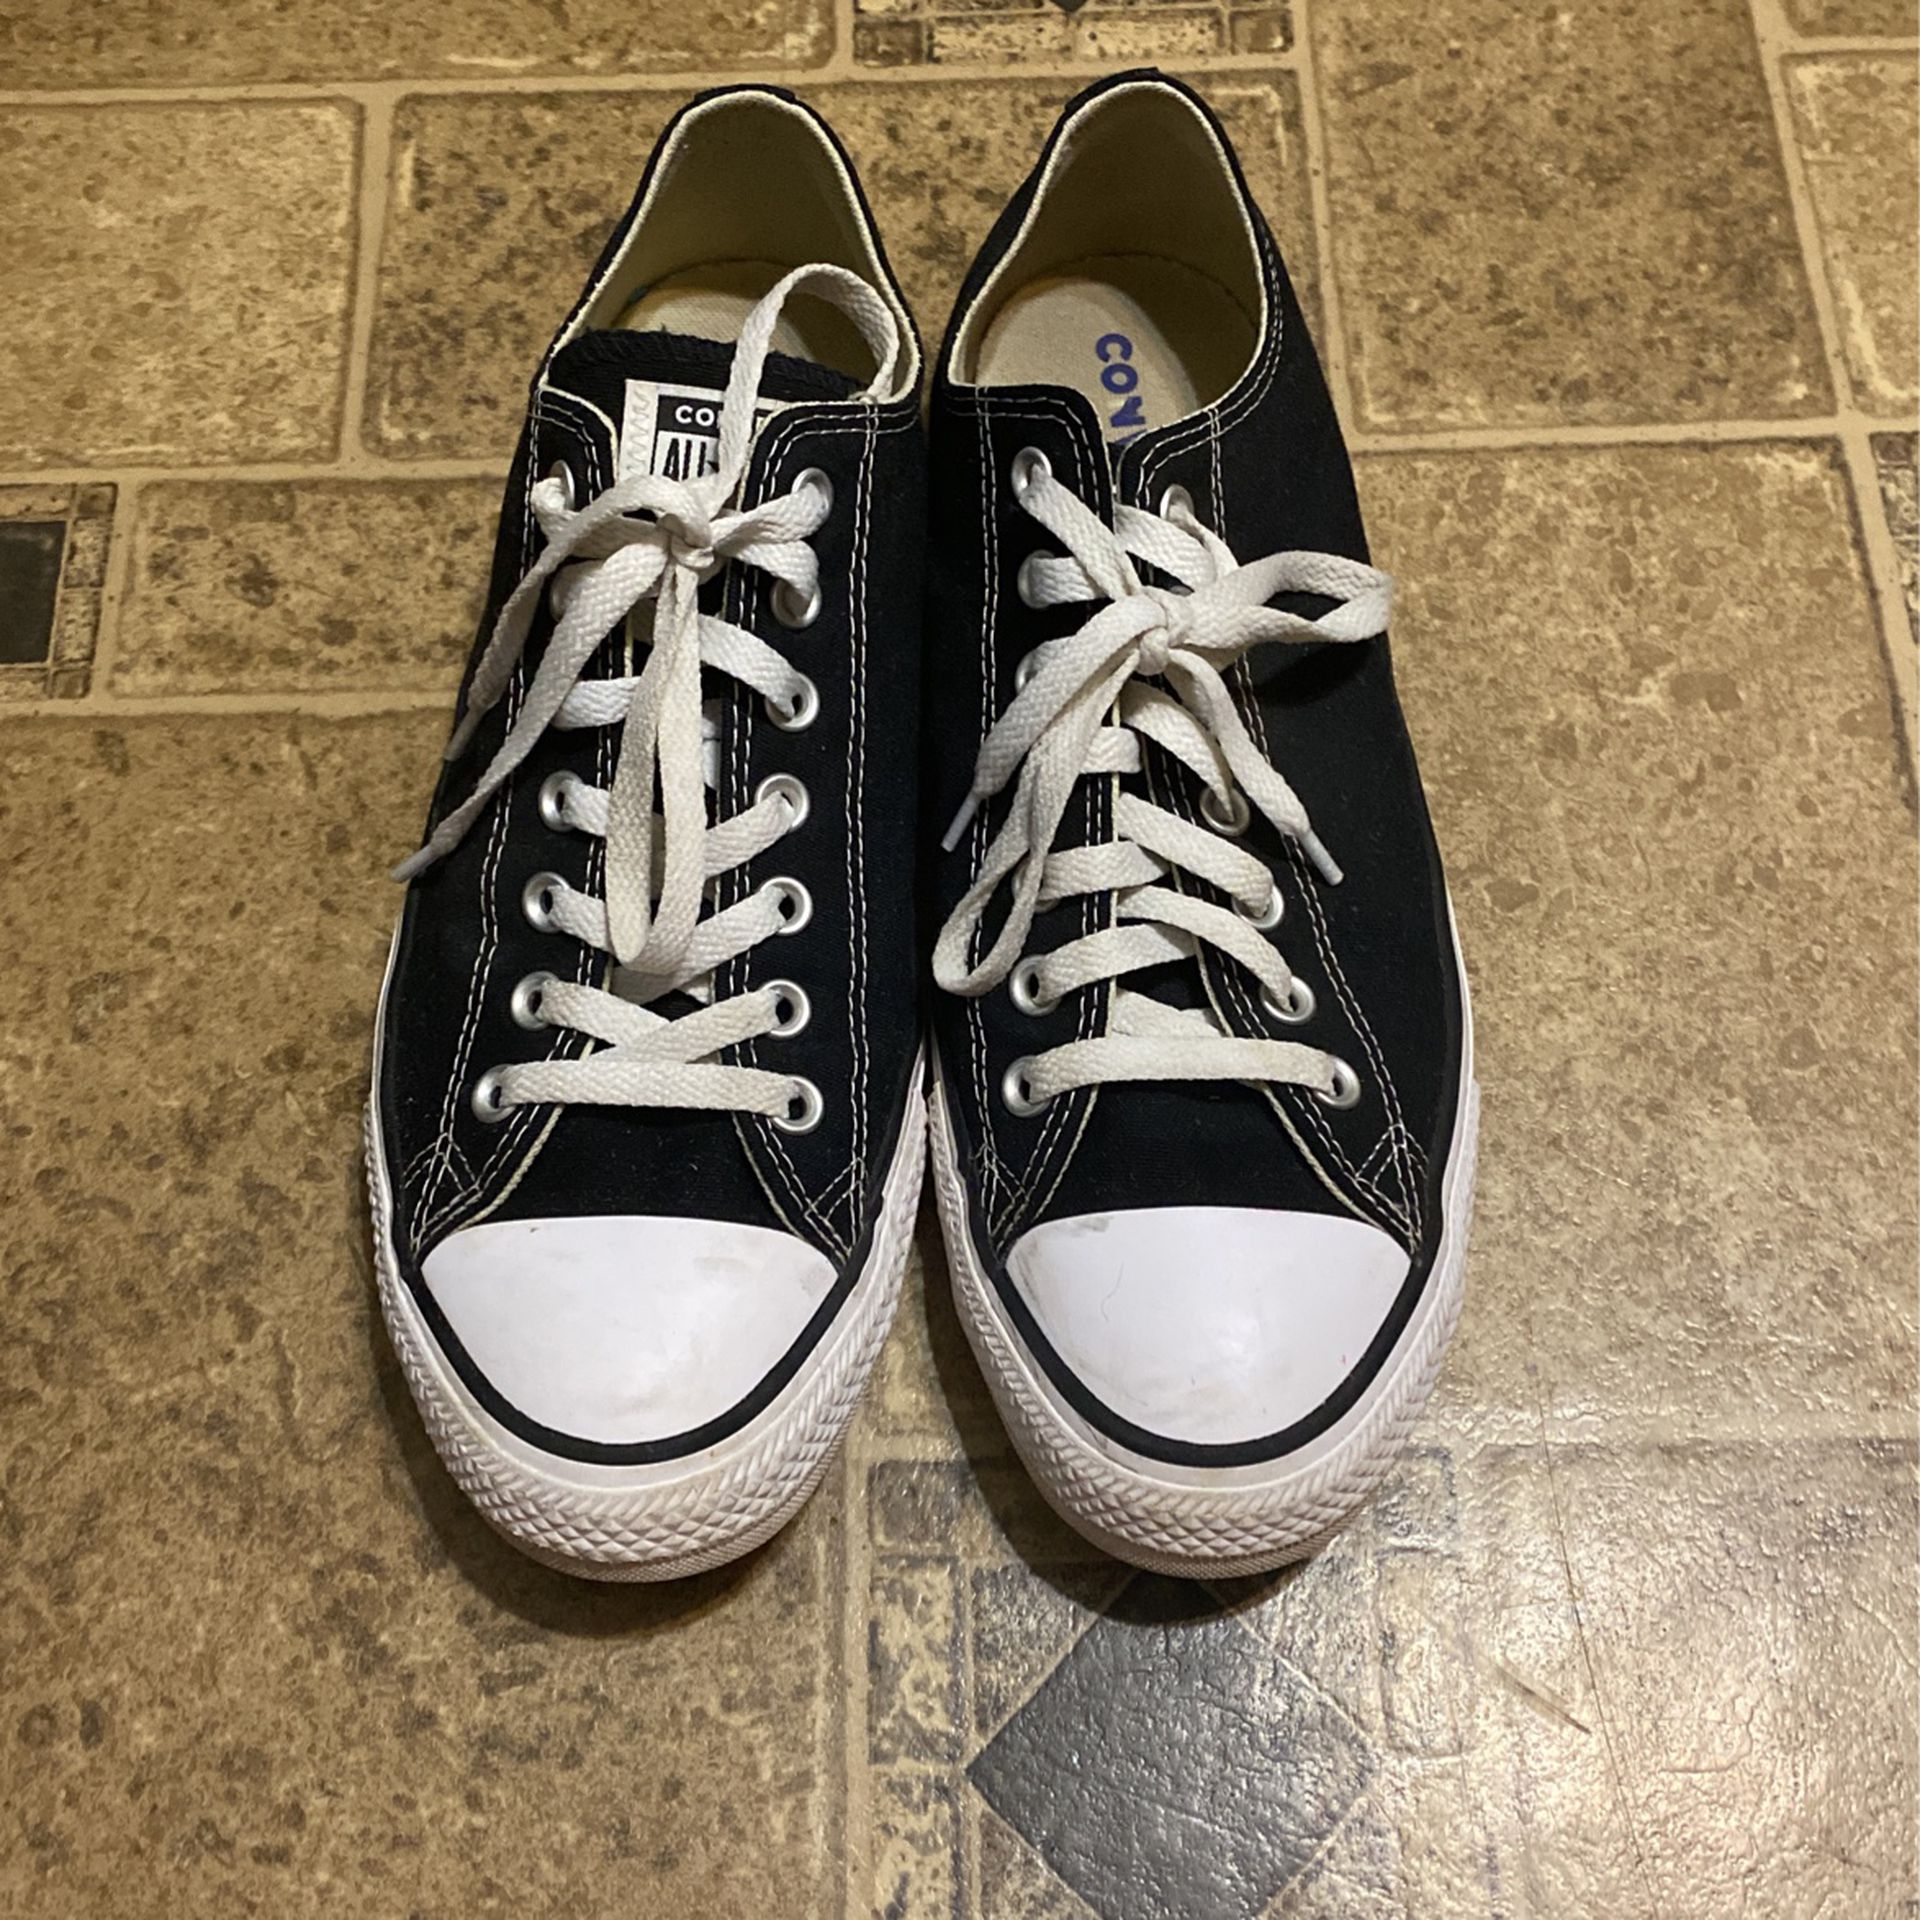 Converse Low Top (men's 10) for Niles, MI - OfferUp